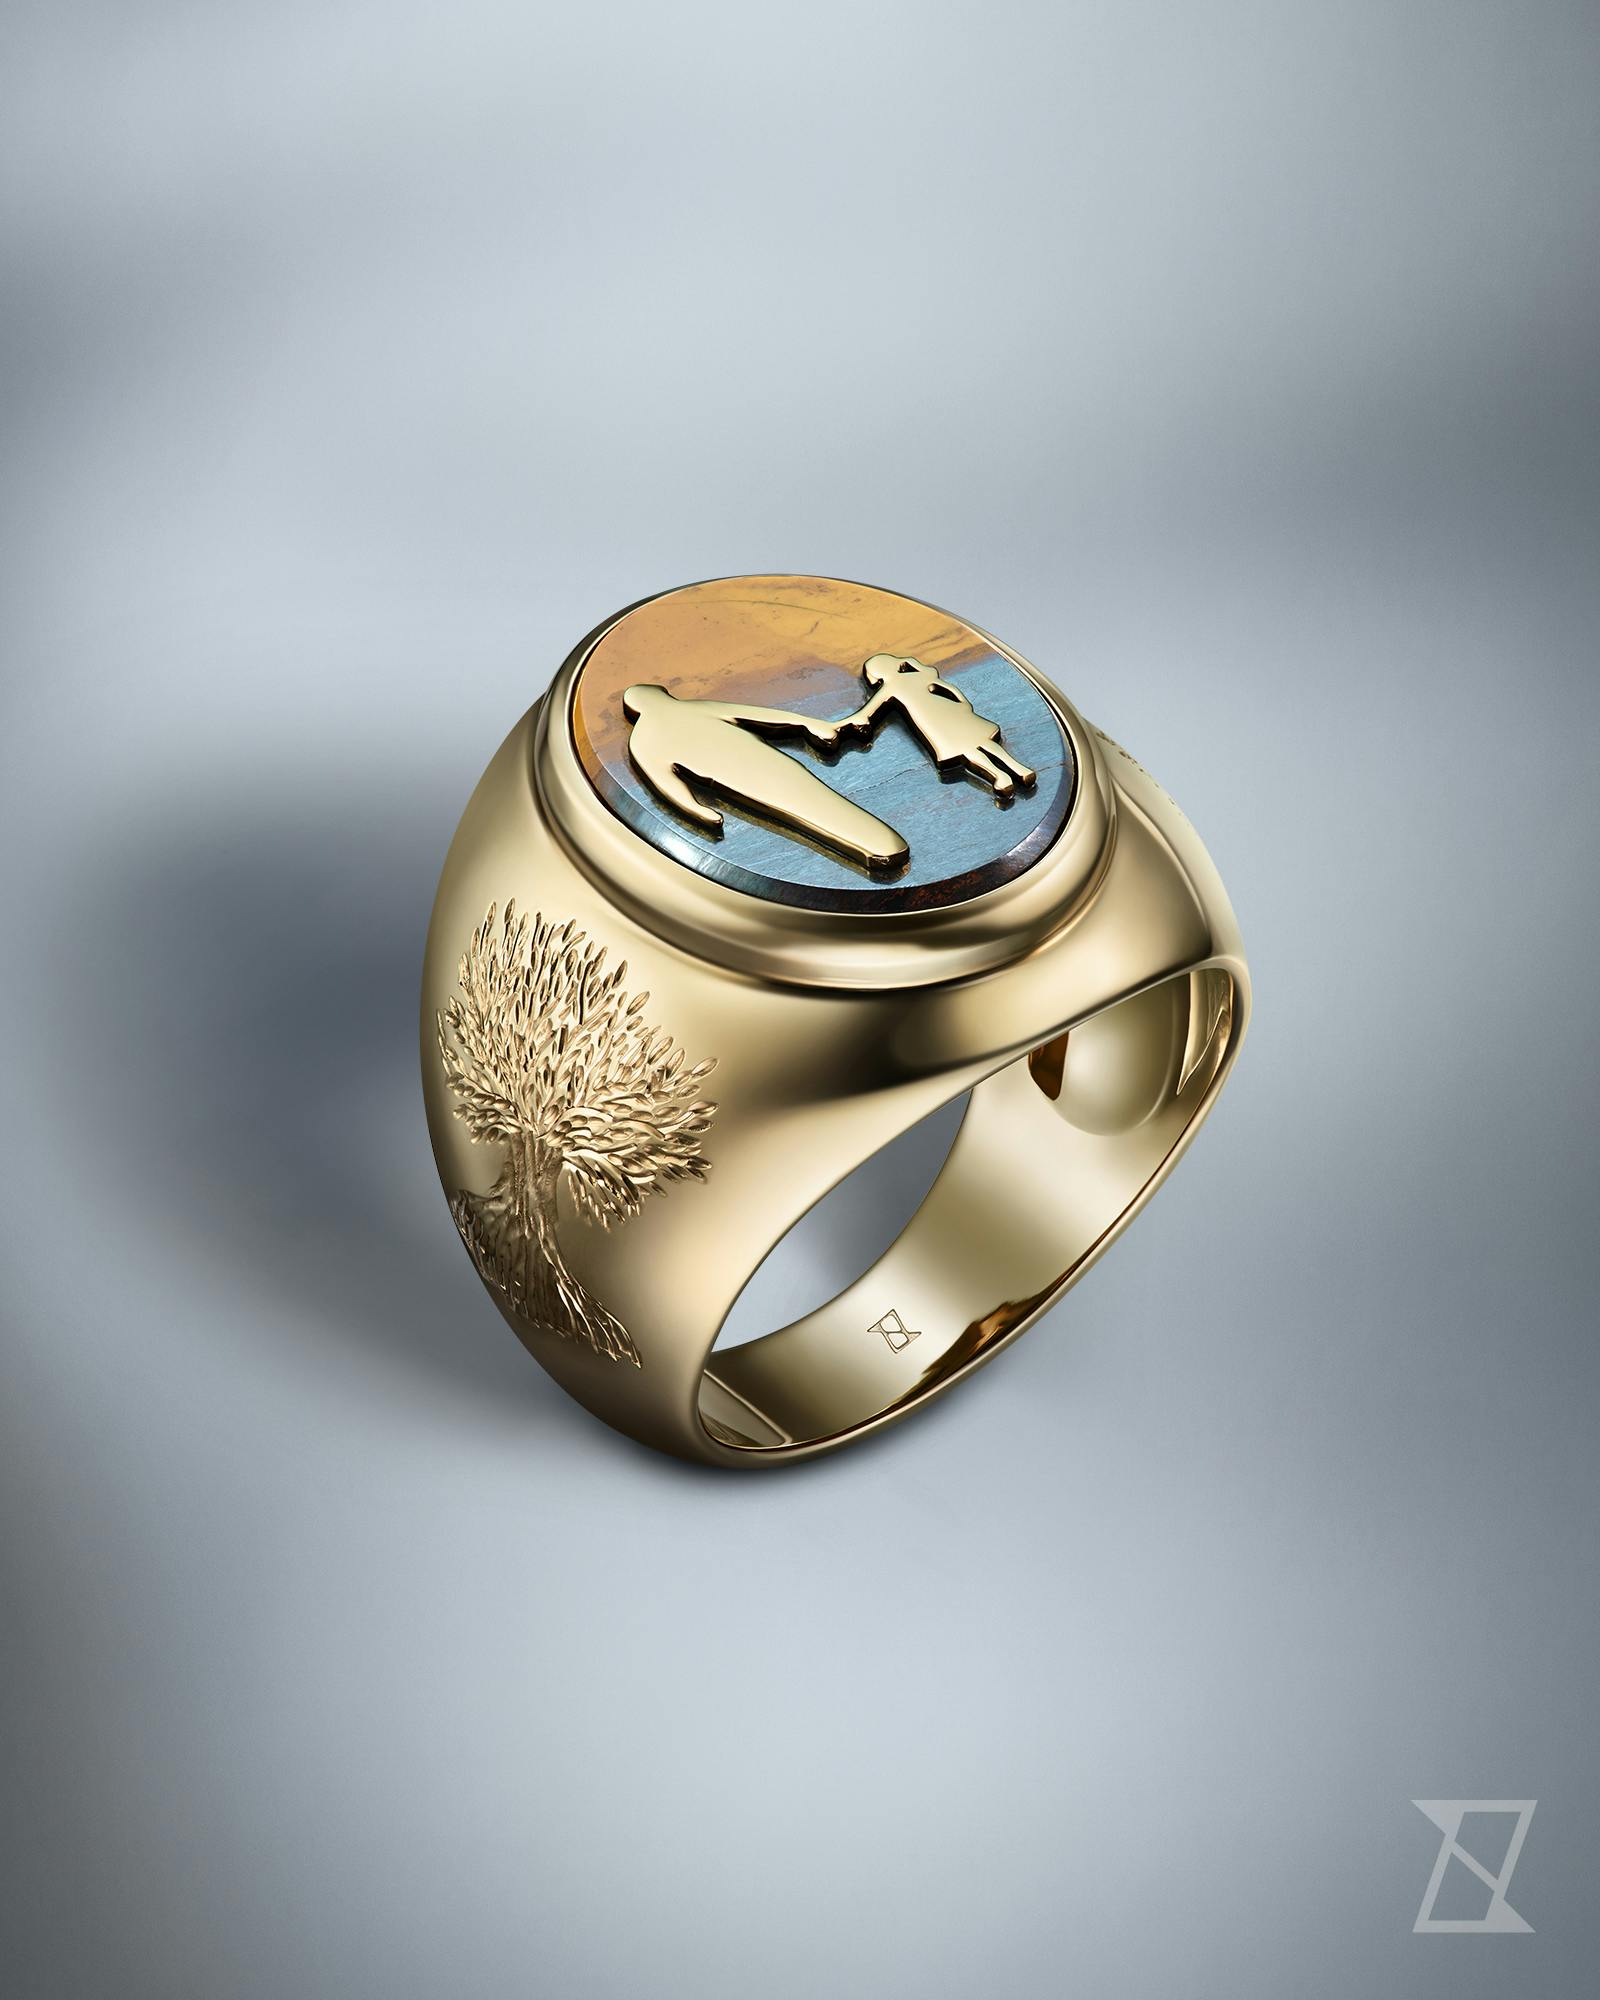 Luxury gold custom signet ring with stone and engraving